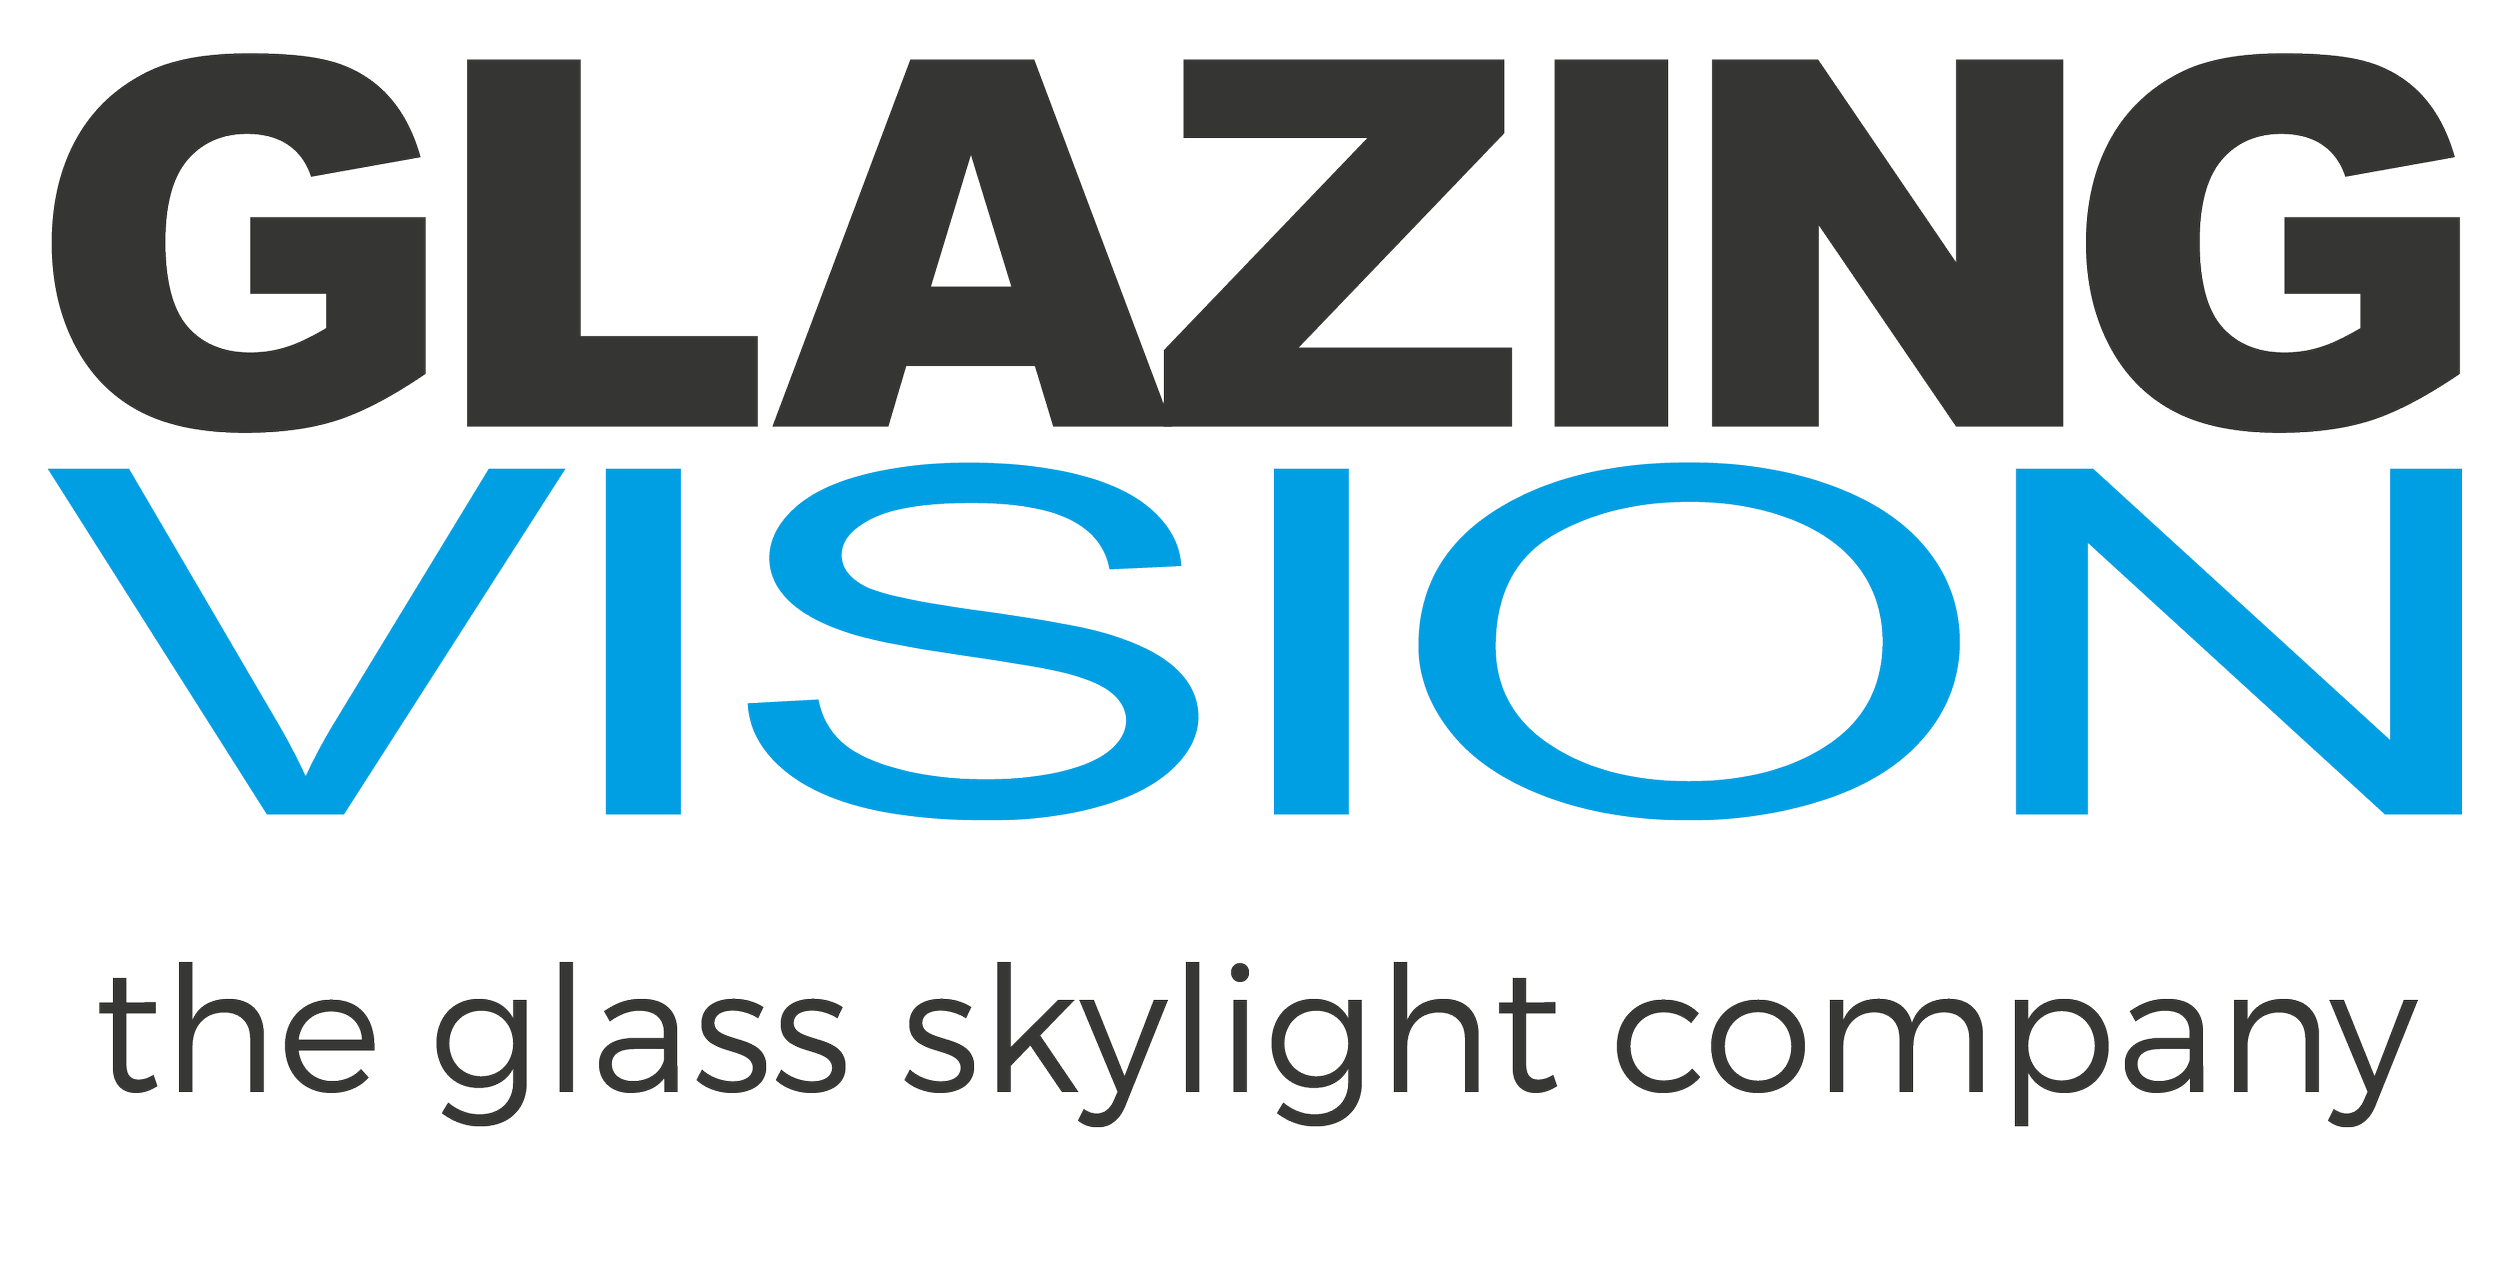 GLAZING VISION the glass skylight company stack-01.png